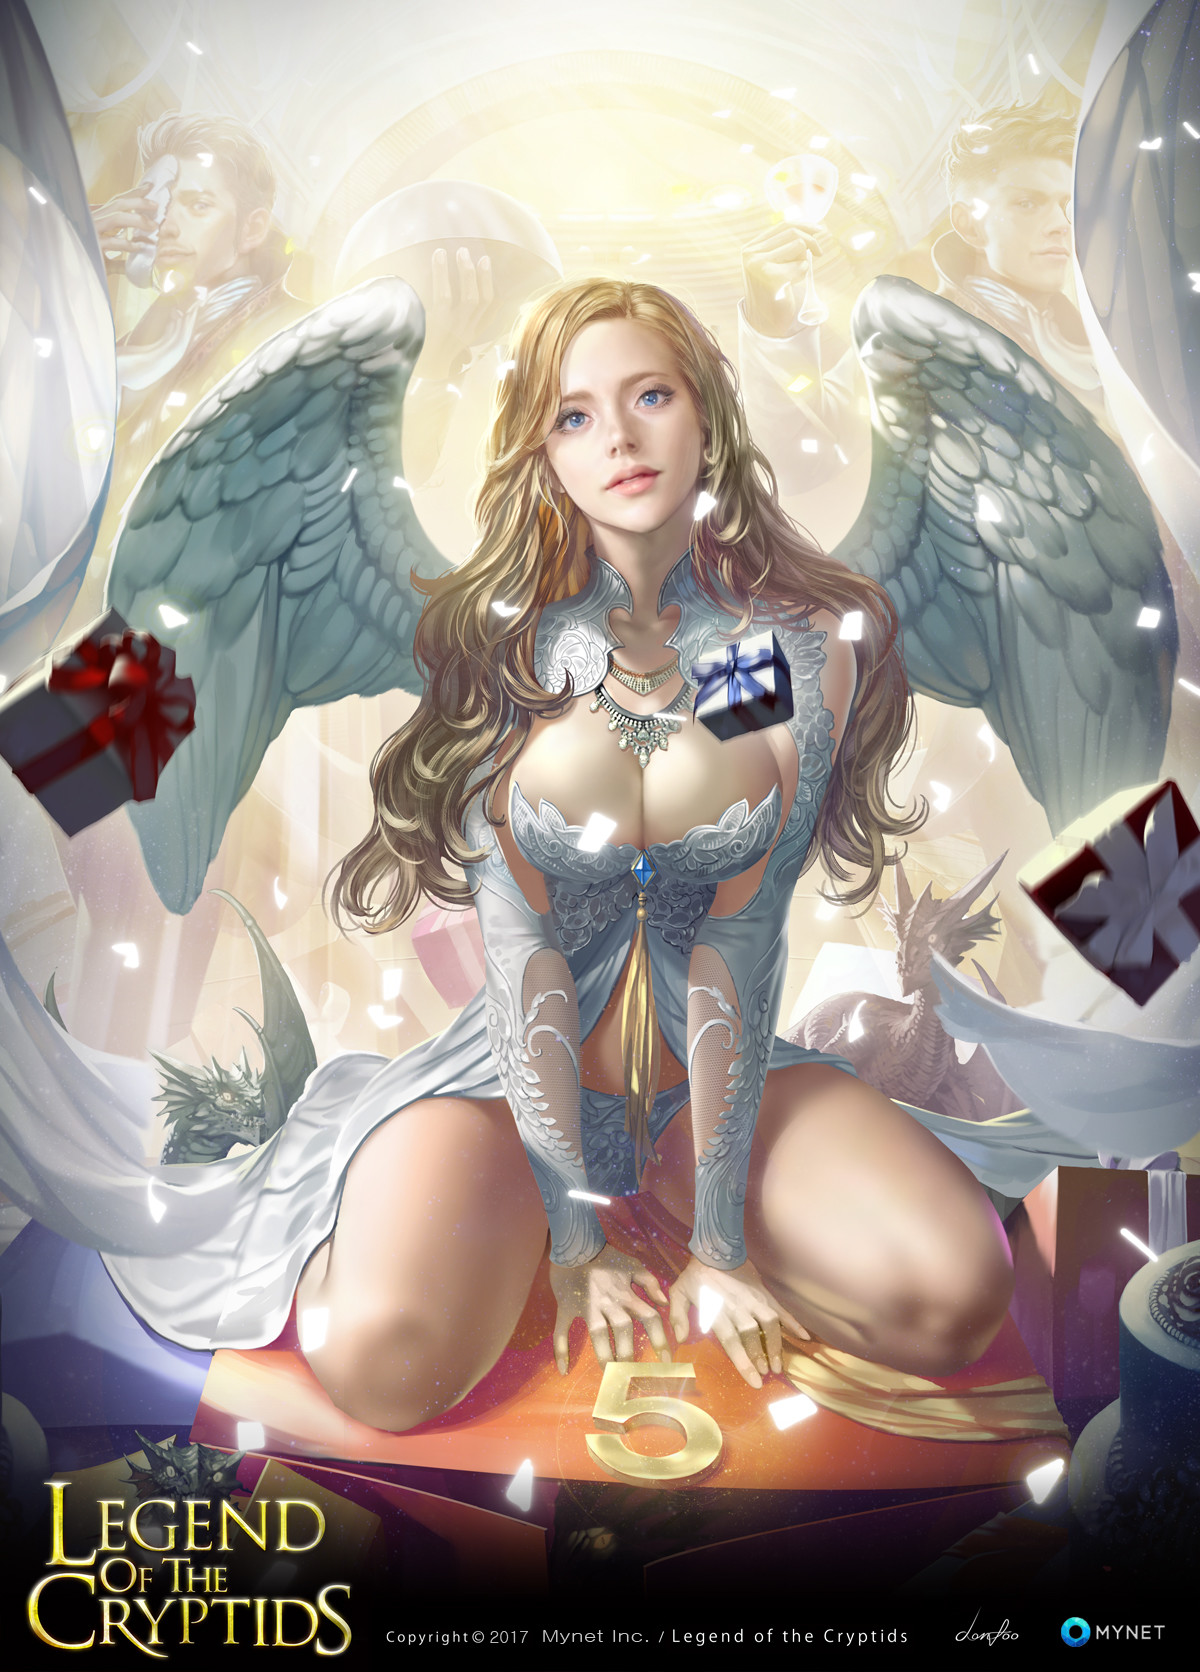 General 1200x1672 Donfoo drawing Legend of the Cryptids women blonde long hair wavy hair angel wings white clothing cleavage dress necklace blue eyes presents digital art watermarked portrait display